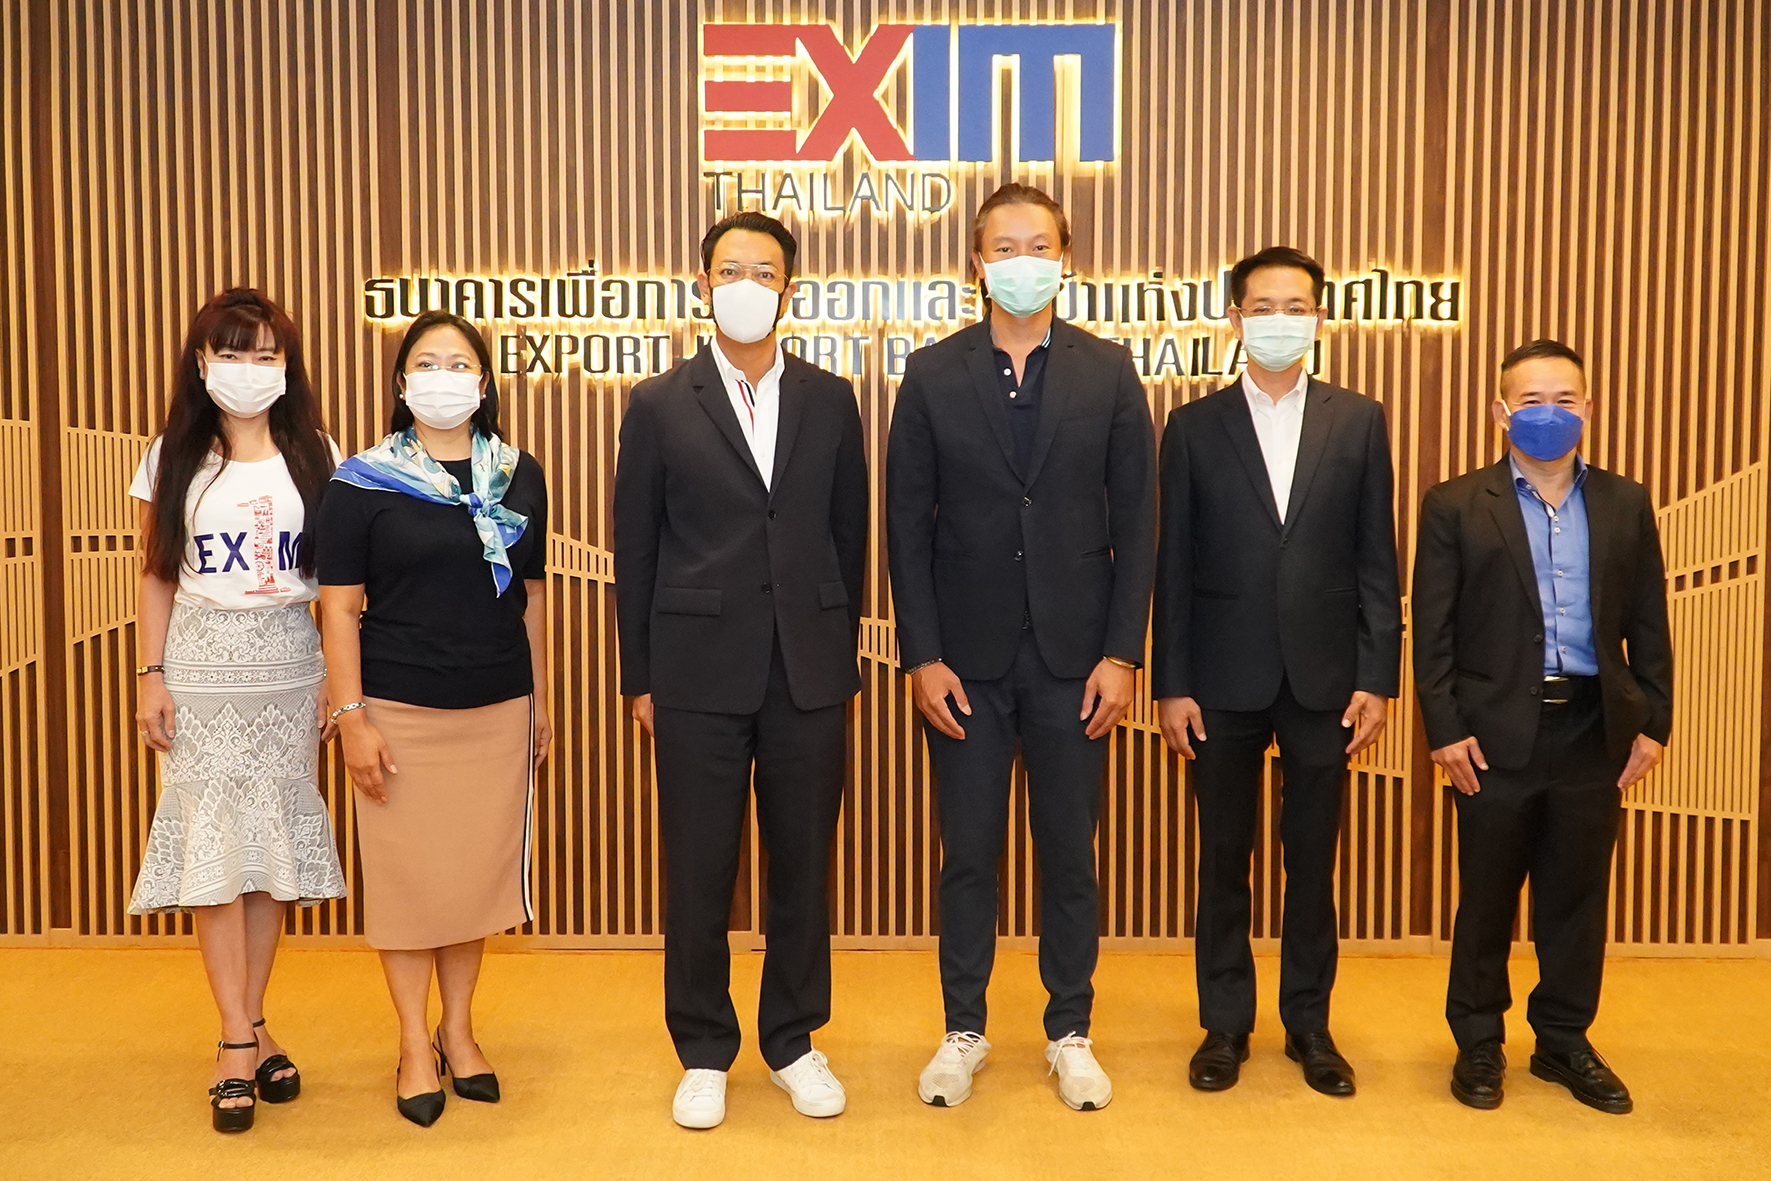 EXIM Thailand Meets and Discusses with Mermaid Group Ways to Support Subsea Engineering Projects on the Global Front